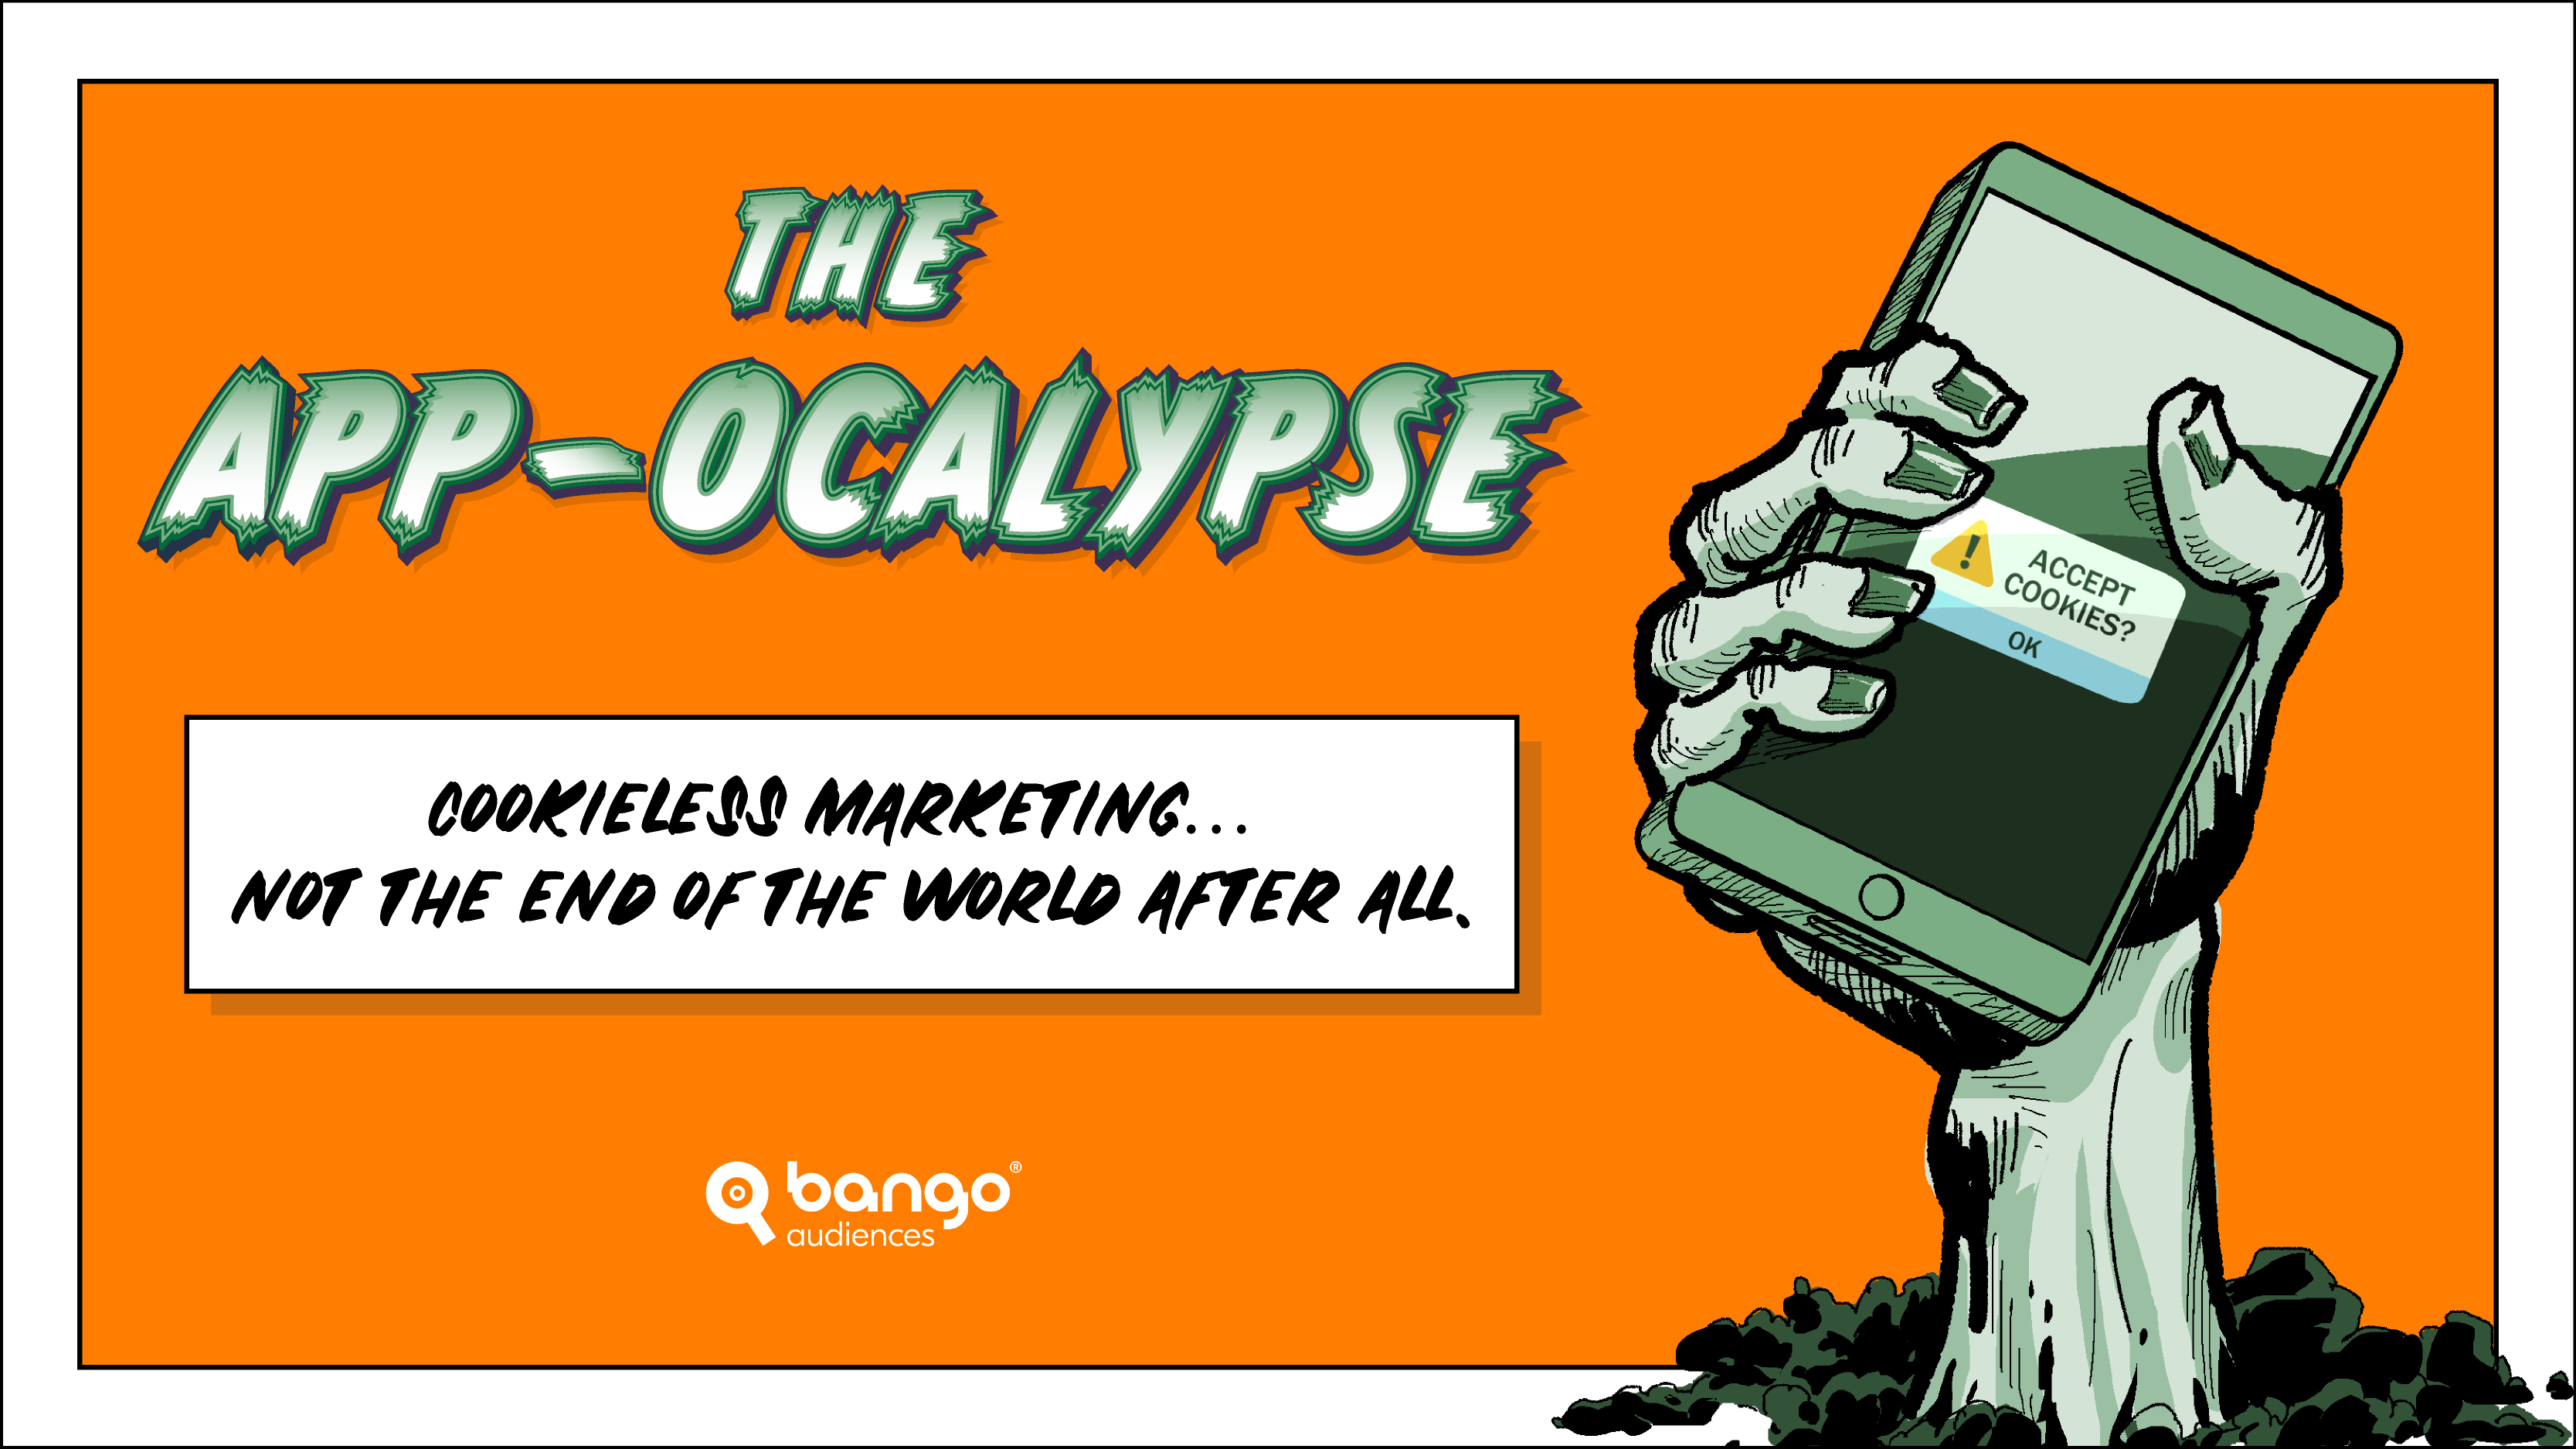 Image for The App-ocalypse - A marketing horror story with a happy ending...